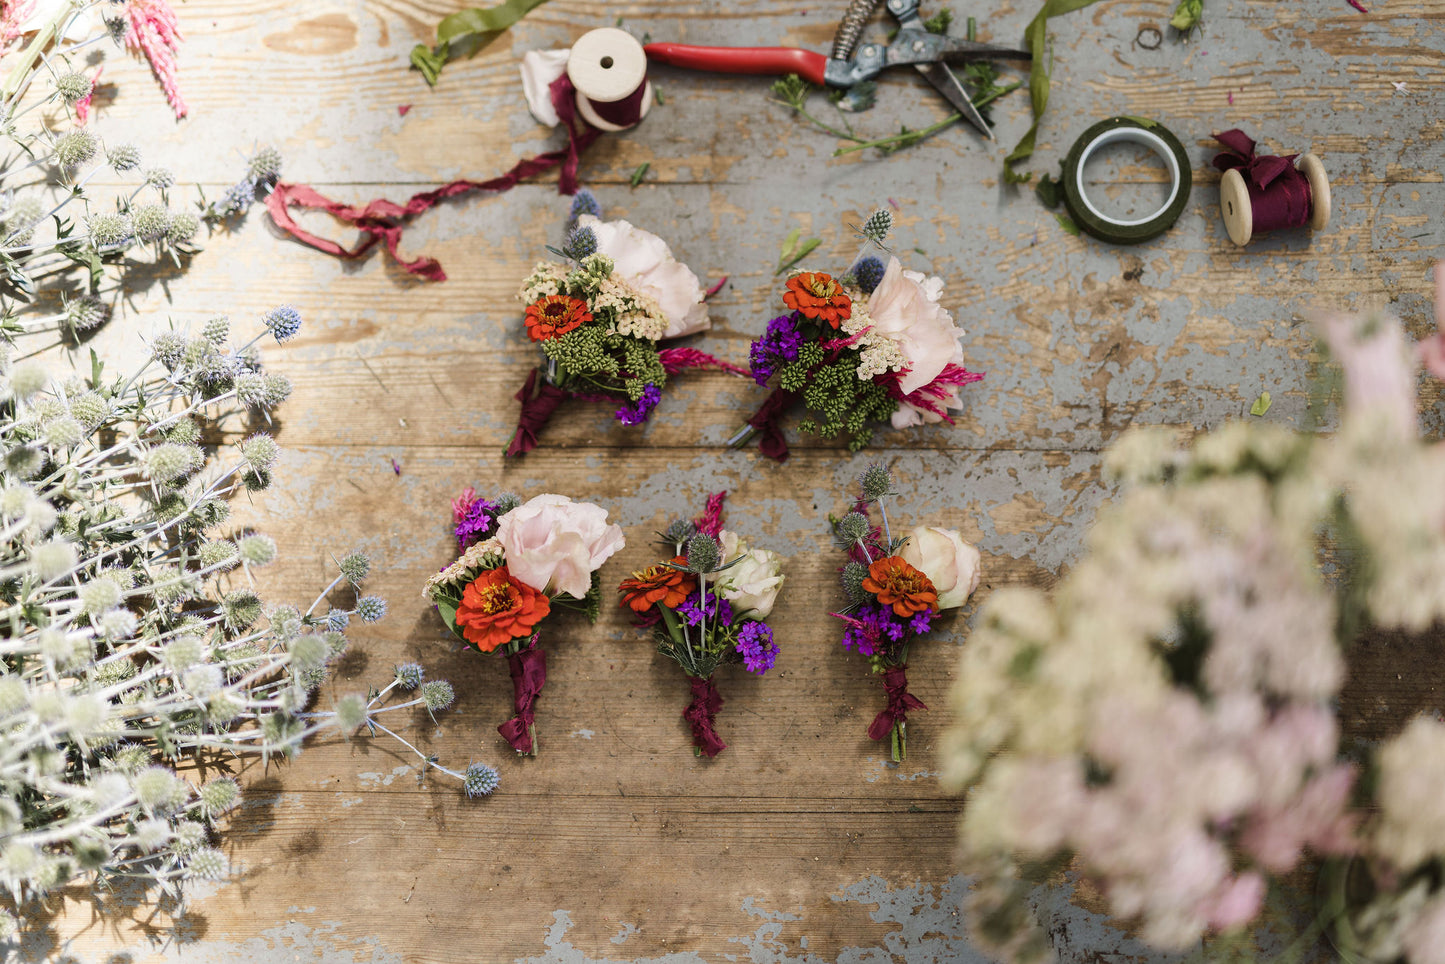 Floristry 2 day Intensive 23 & 24 May - Flower Farm